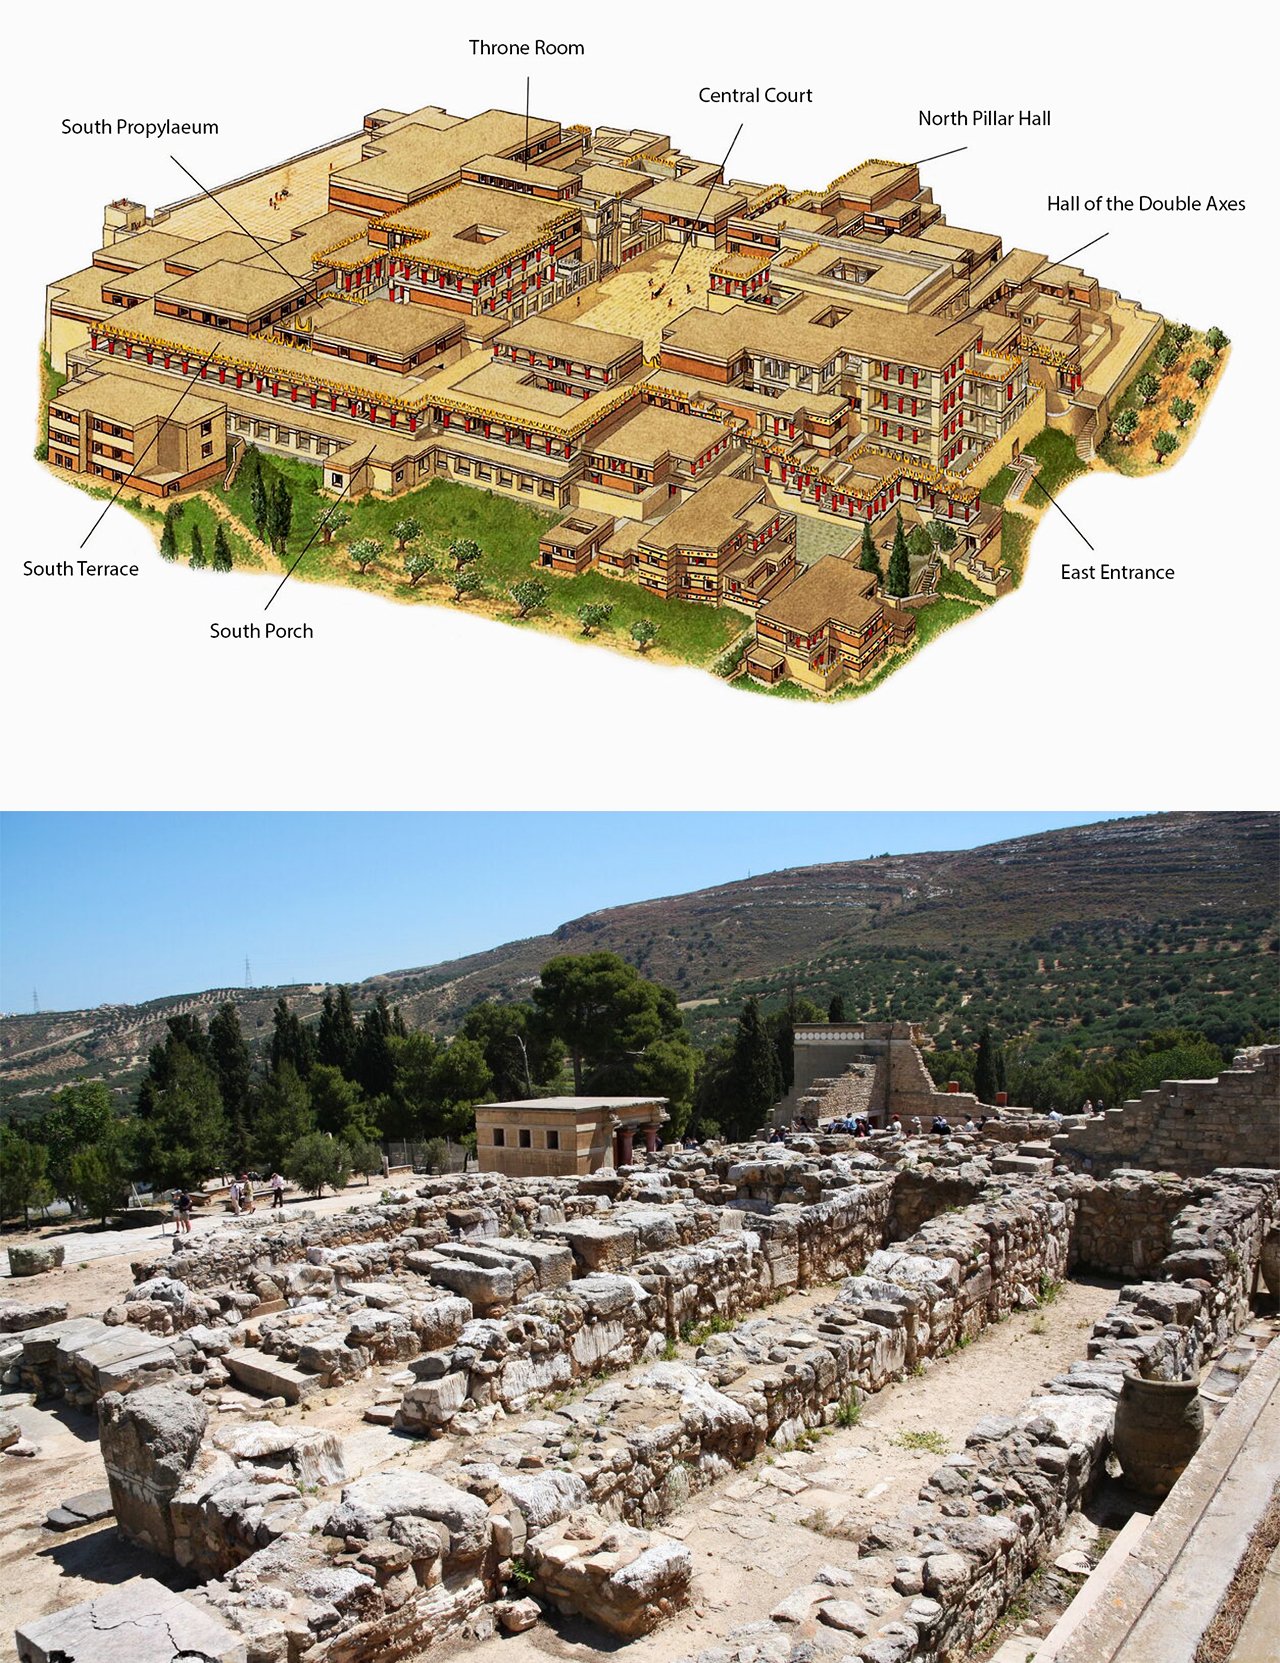 A two-part image of the Minoan palace of Knossos in Crete, Greece. The top image shows a 3D reconstruction of the palace as it might have looked in ancient times, with labels for different areas. The bottom image shows a photograph of the ruins as they appear today, with scattered stone blocks and walls. The ruins are located on a hillside with trees and shrubbery in the background.